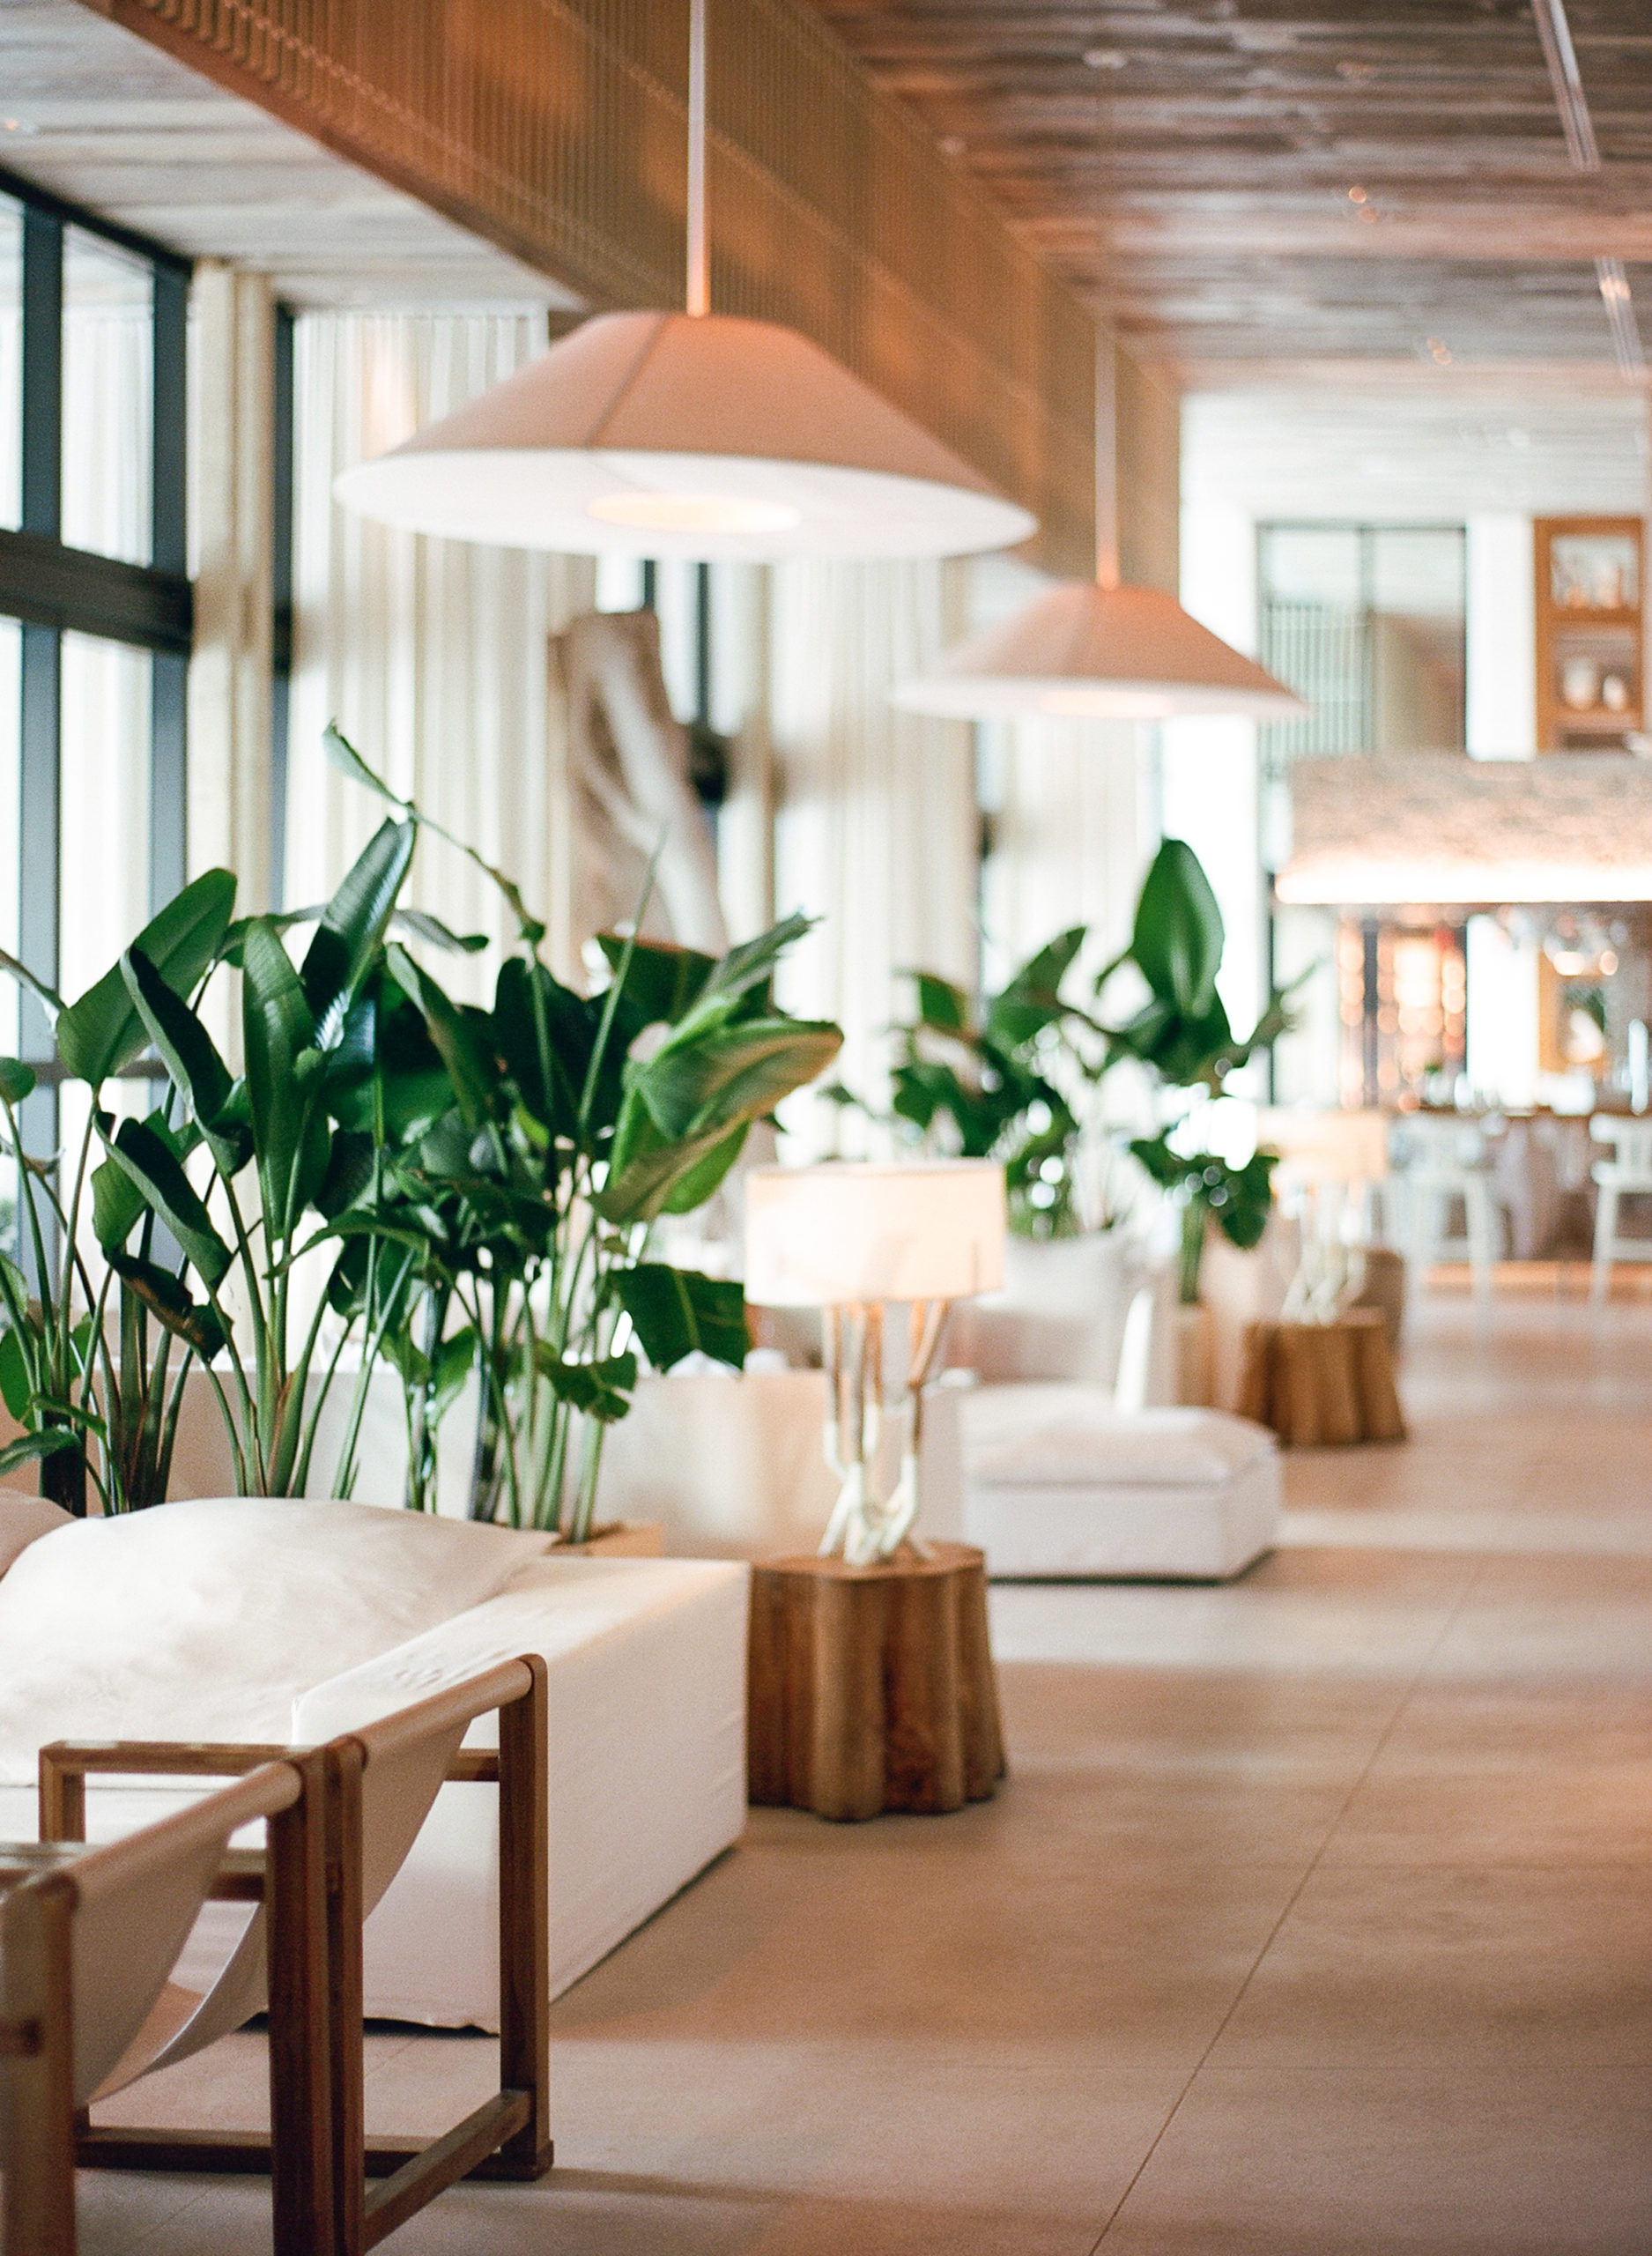 The 1 Hotel South Beach lobby features organic yet modern elements that perfectly complimented this wedding